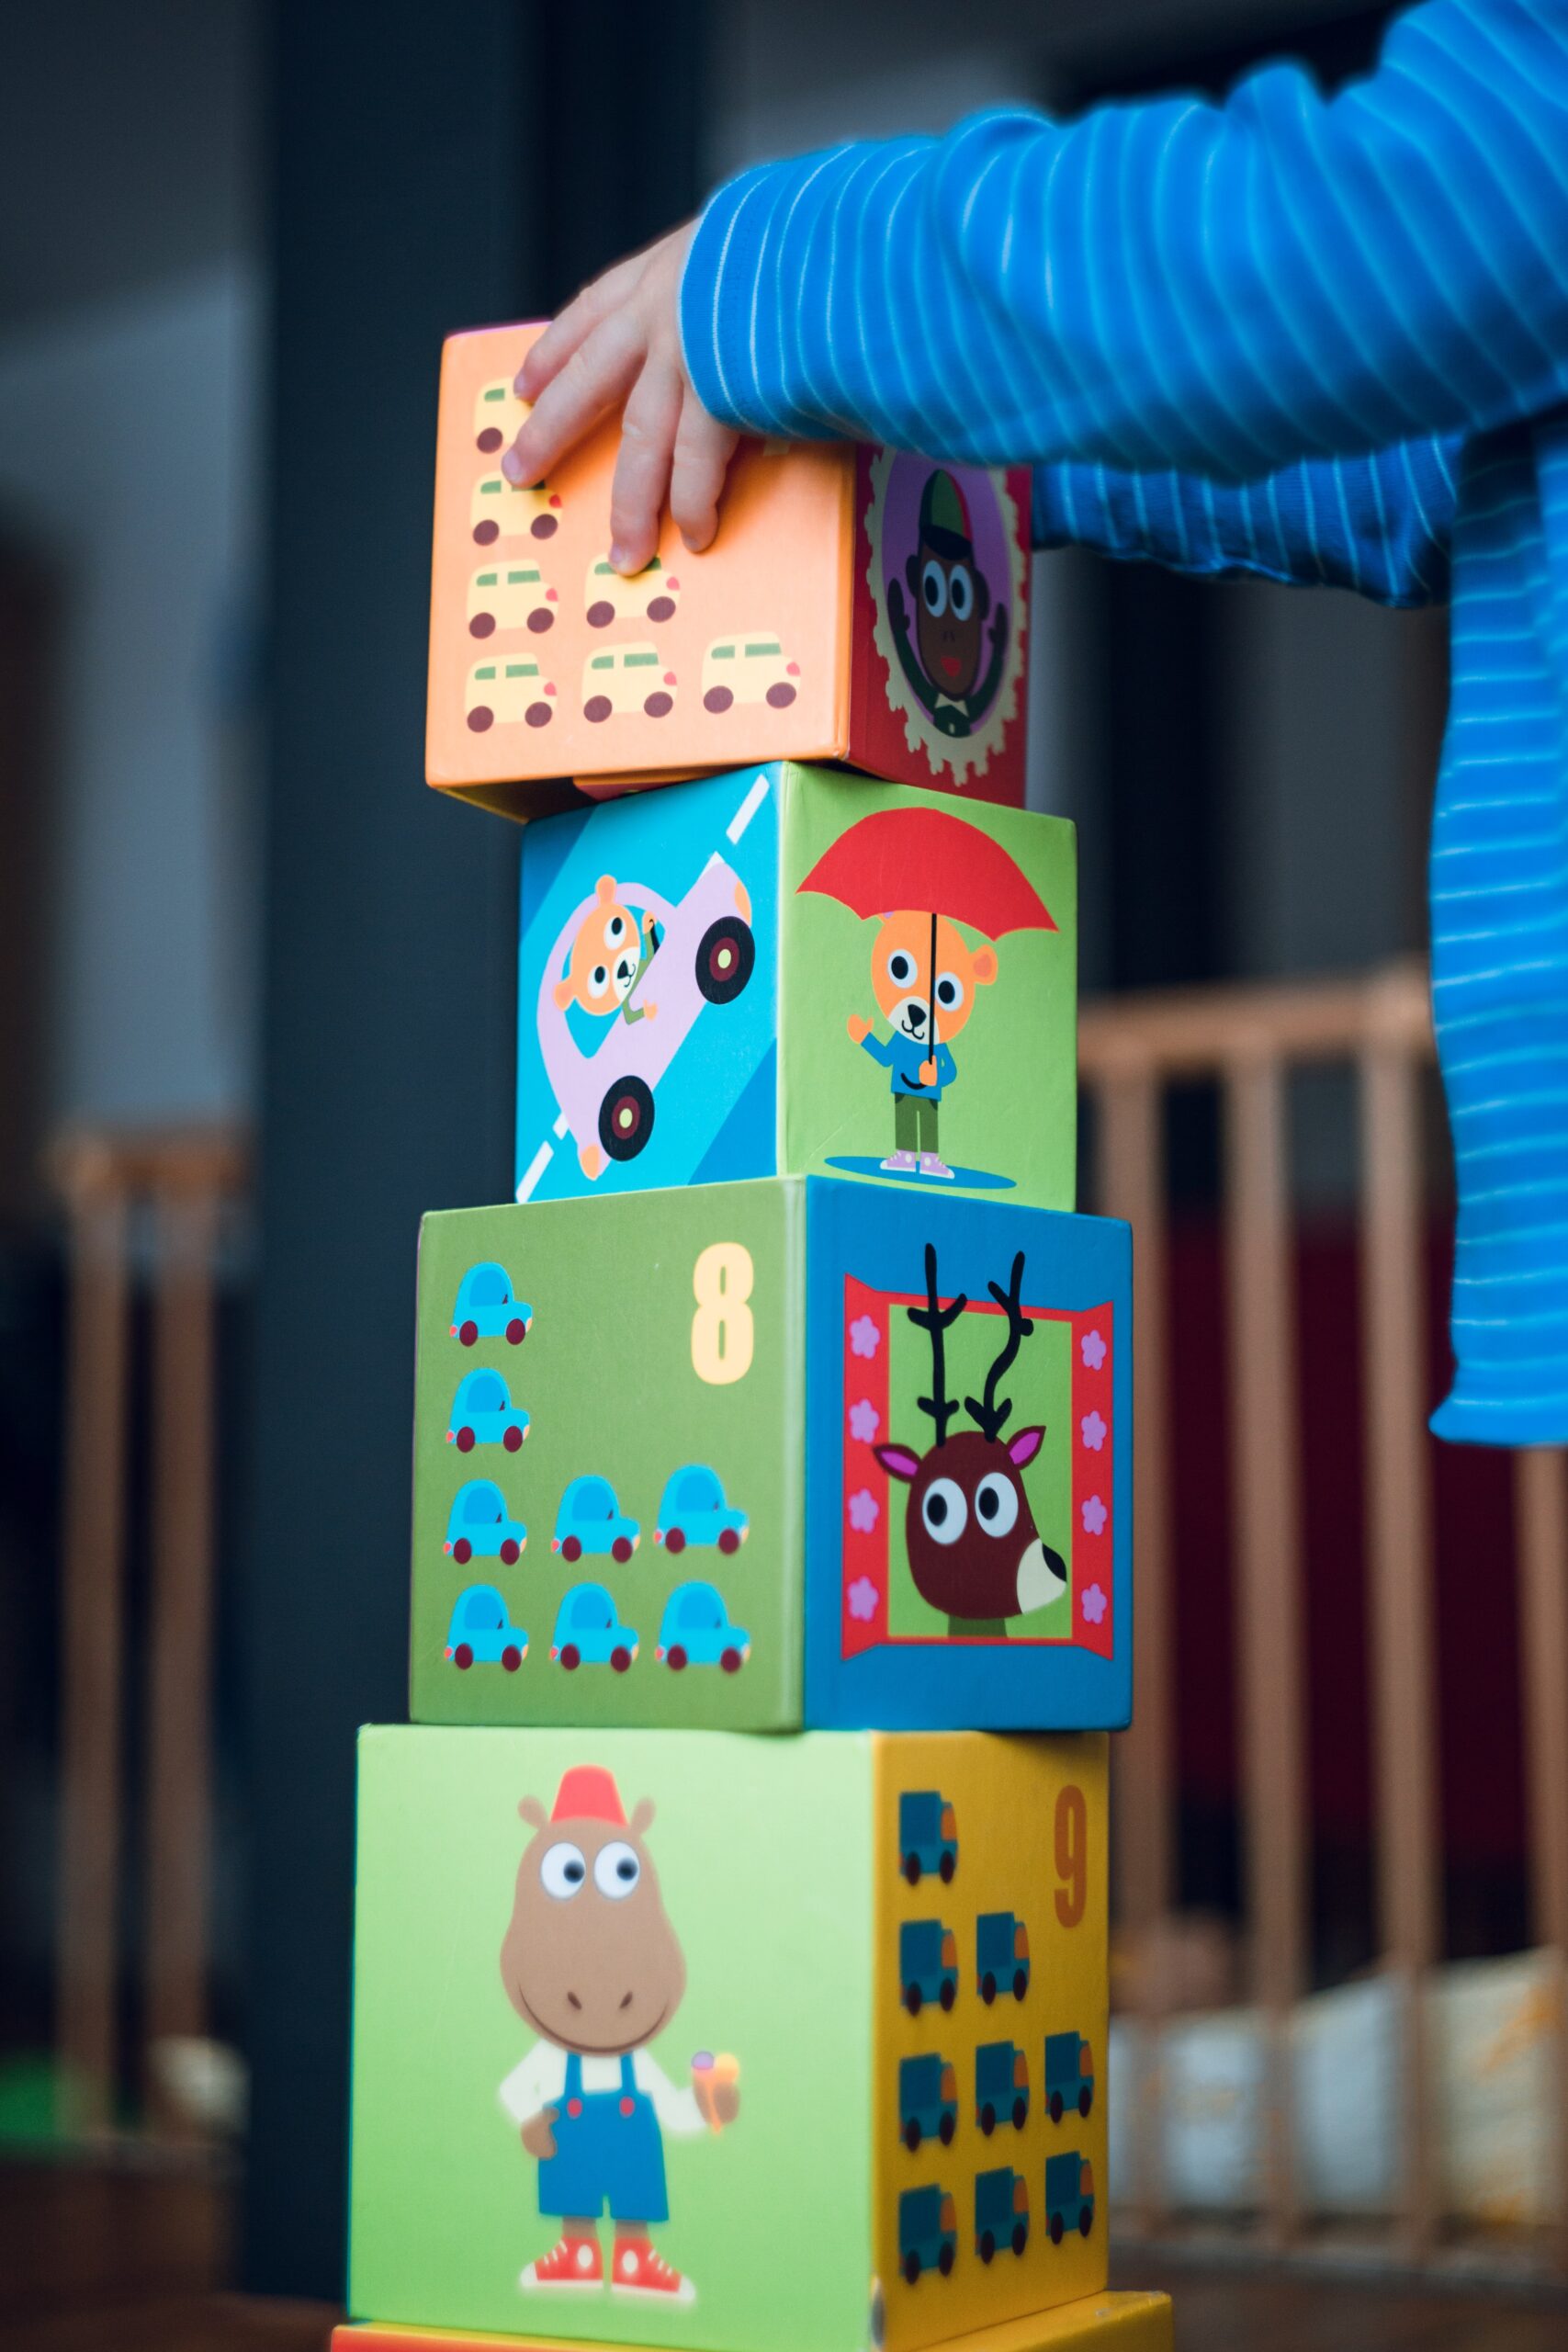 An image showcasing a child's hands grasping Montessori wooden blocks of various shapes and sizes, forming a tower, while the child's face radiates joy and concentration